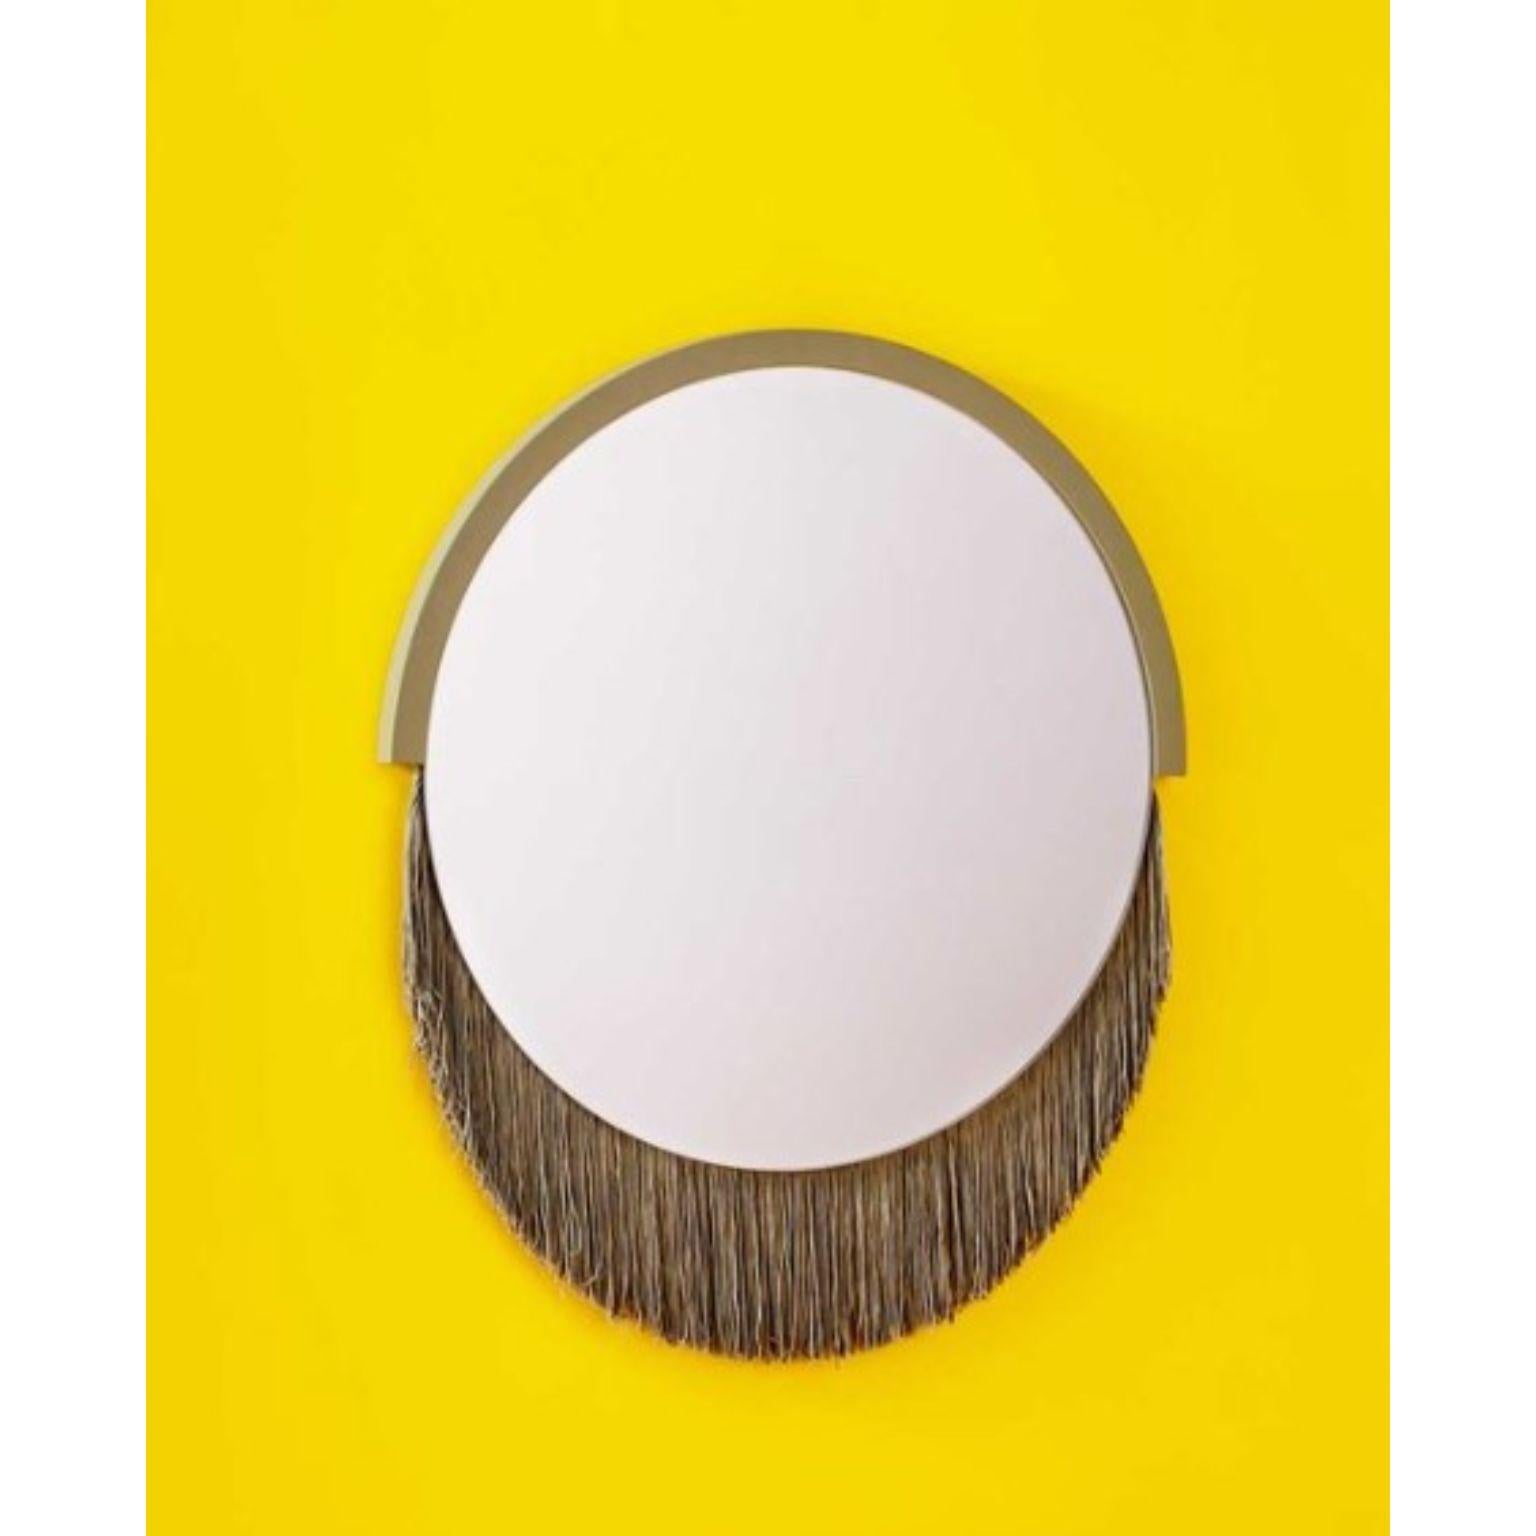 Post-Modern Set of 4 Boudoir Wall Mirrors by Tero Kuitunen For Sale